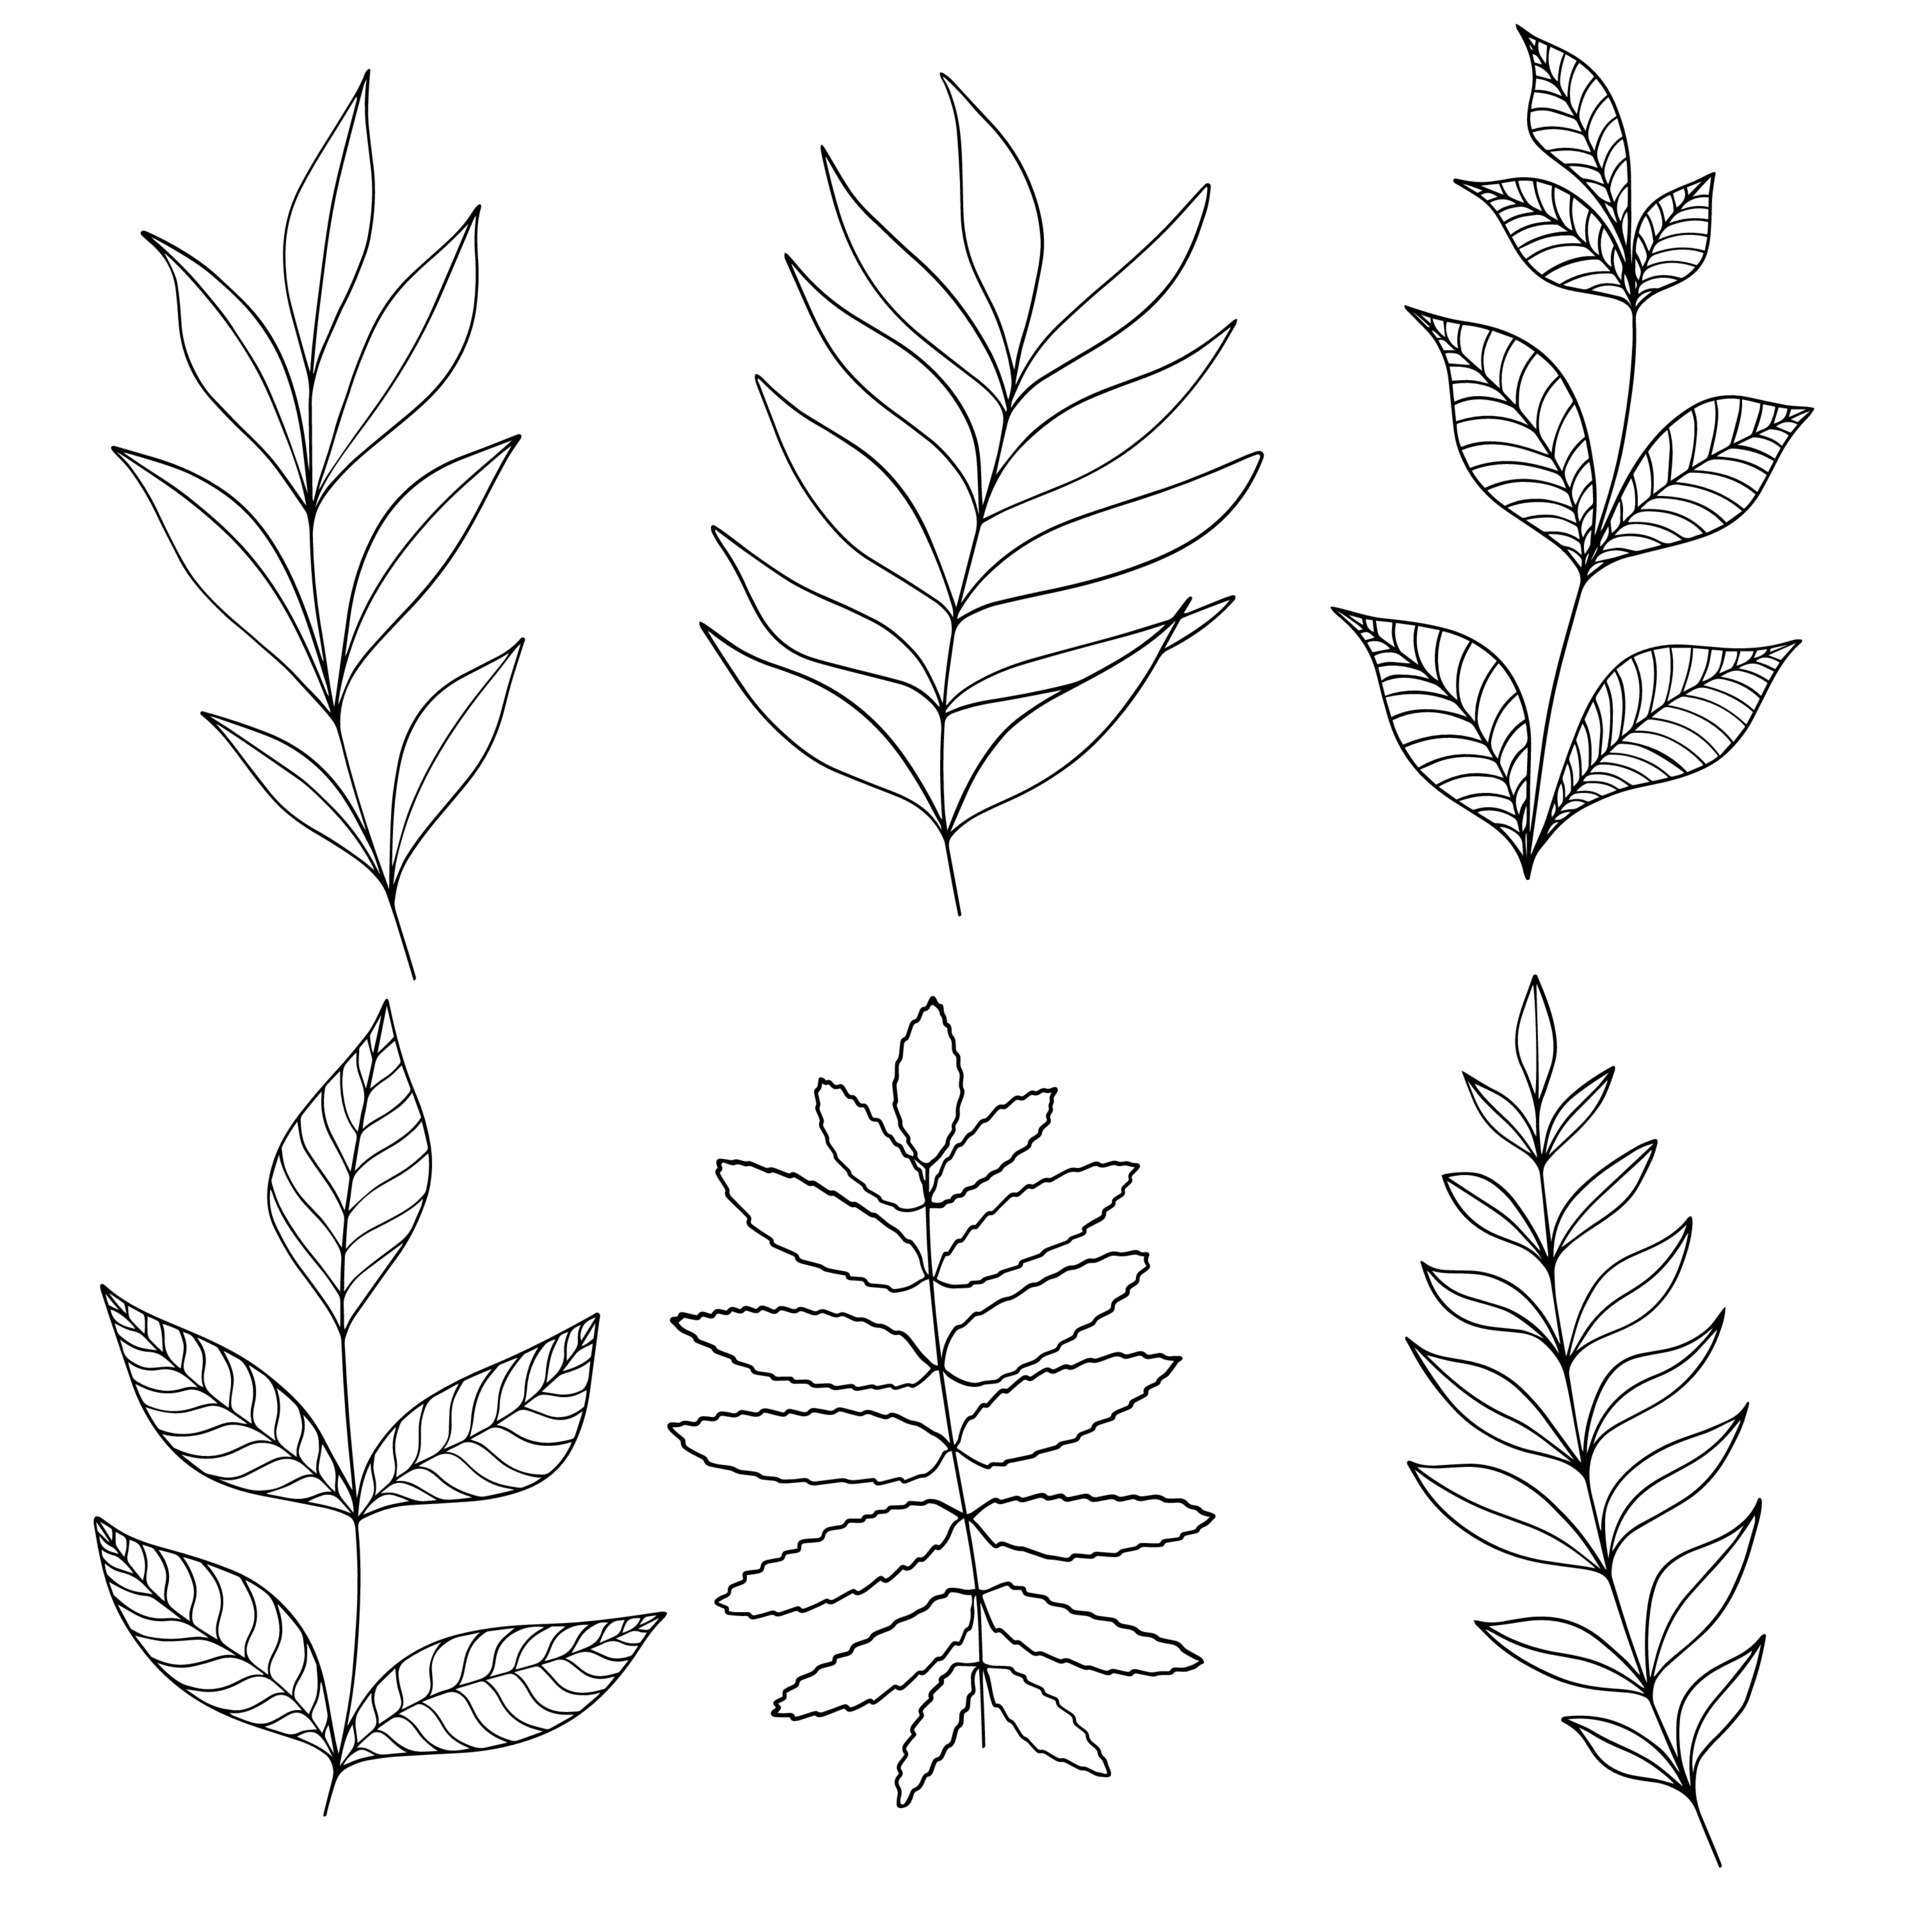 How TO Draw psrts of leaf step by step/parts of leaf drawing, - YouTube